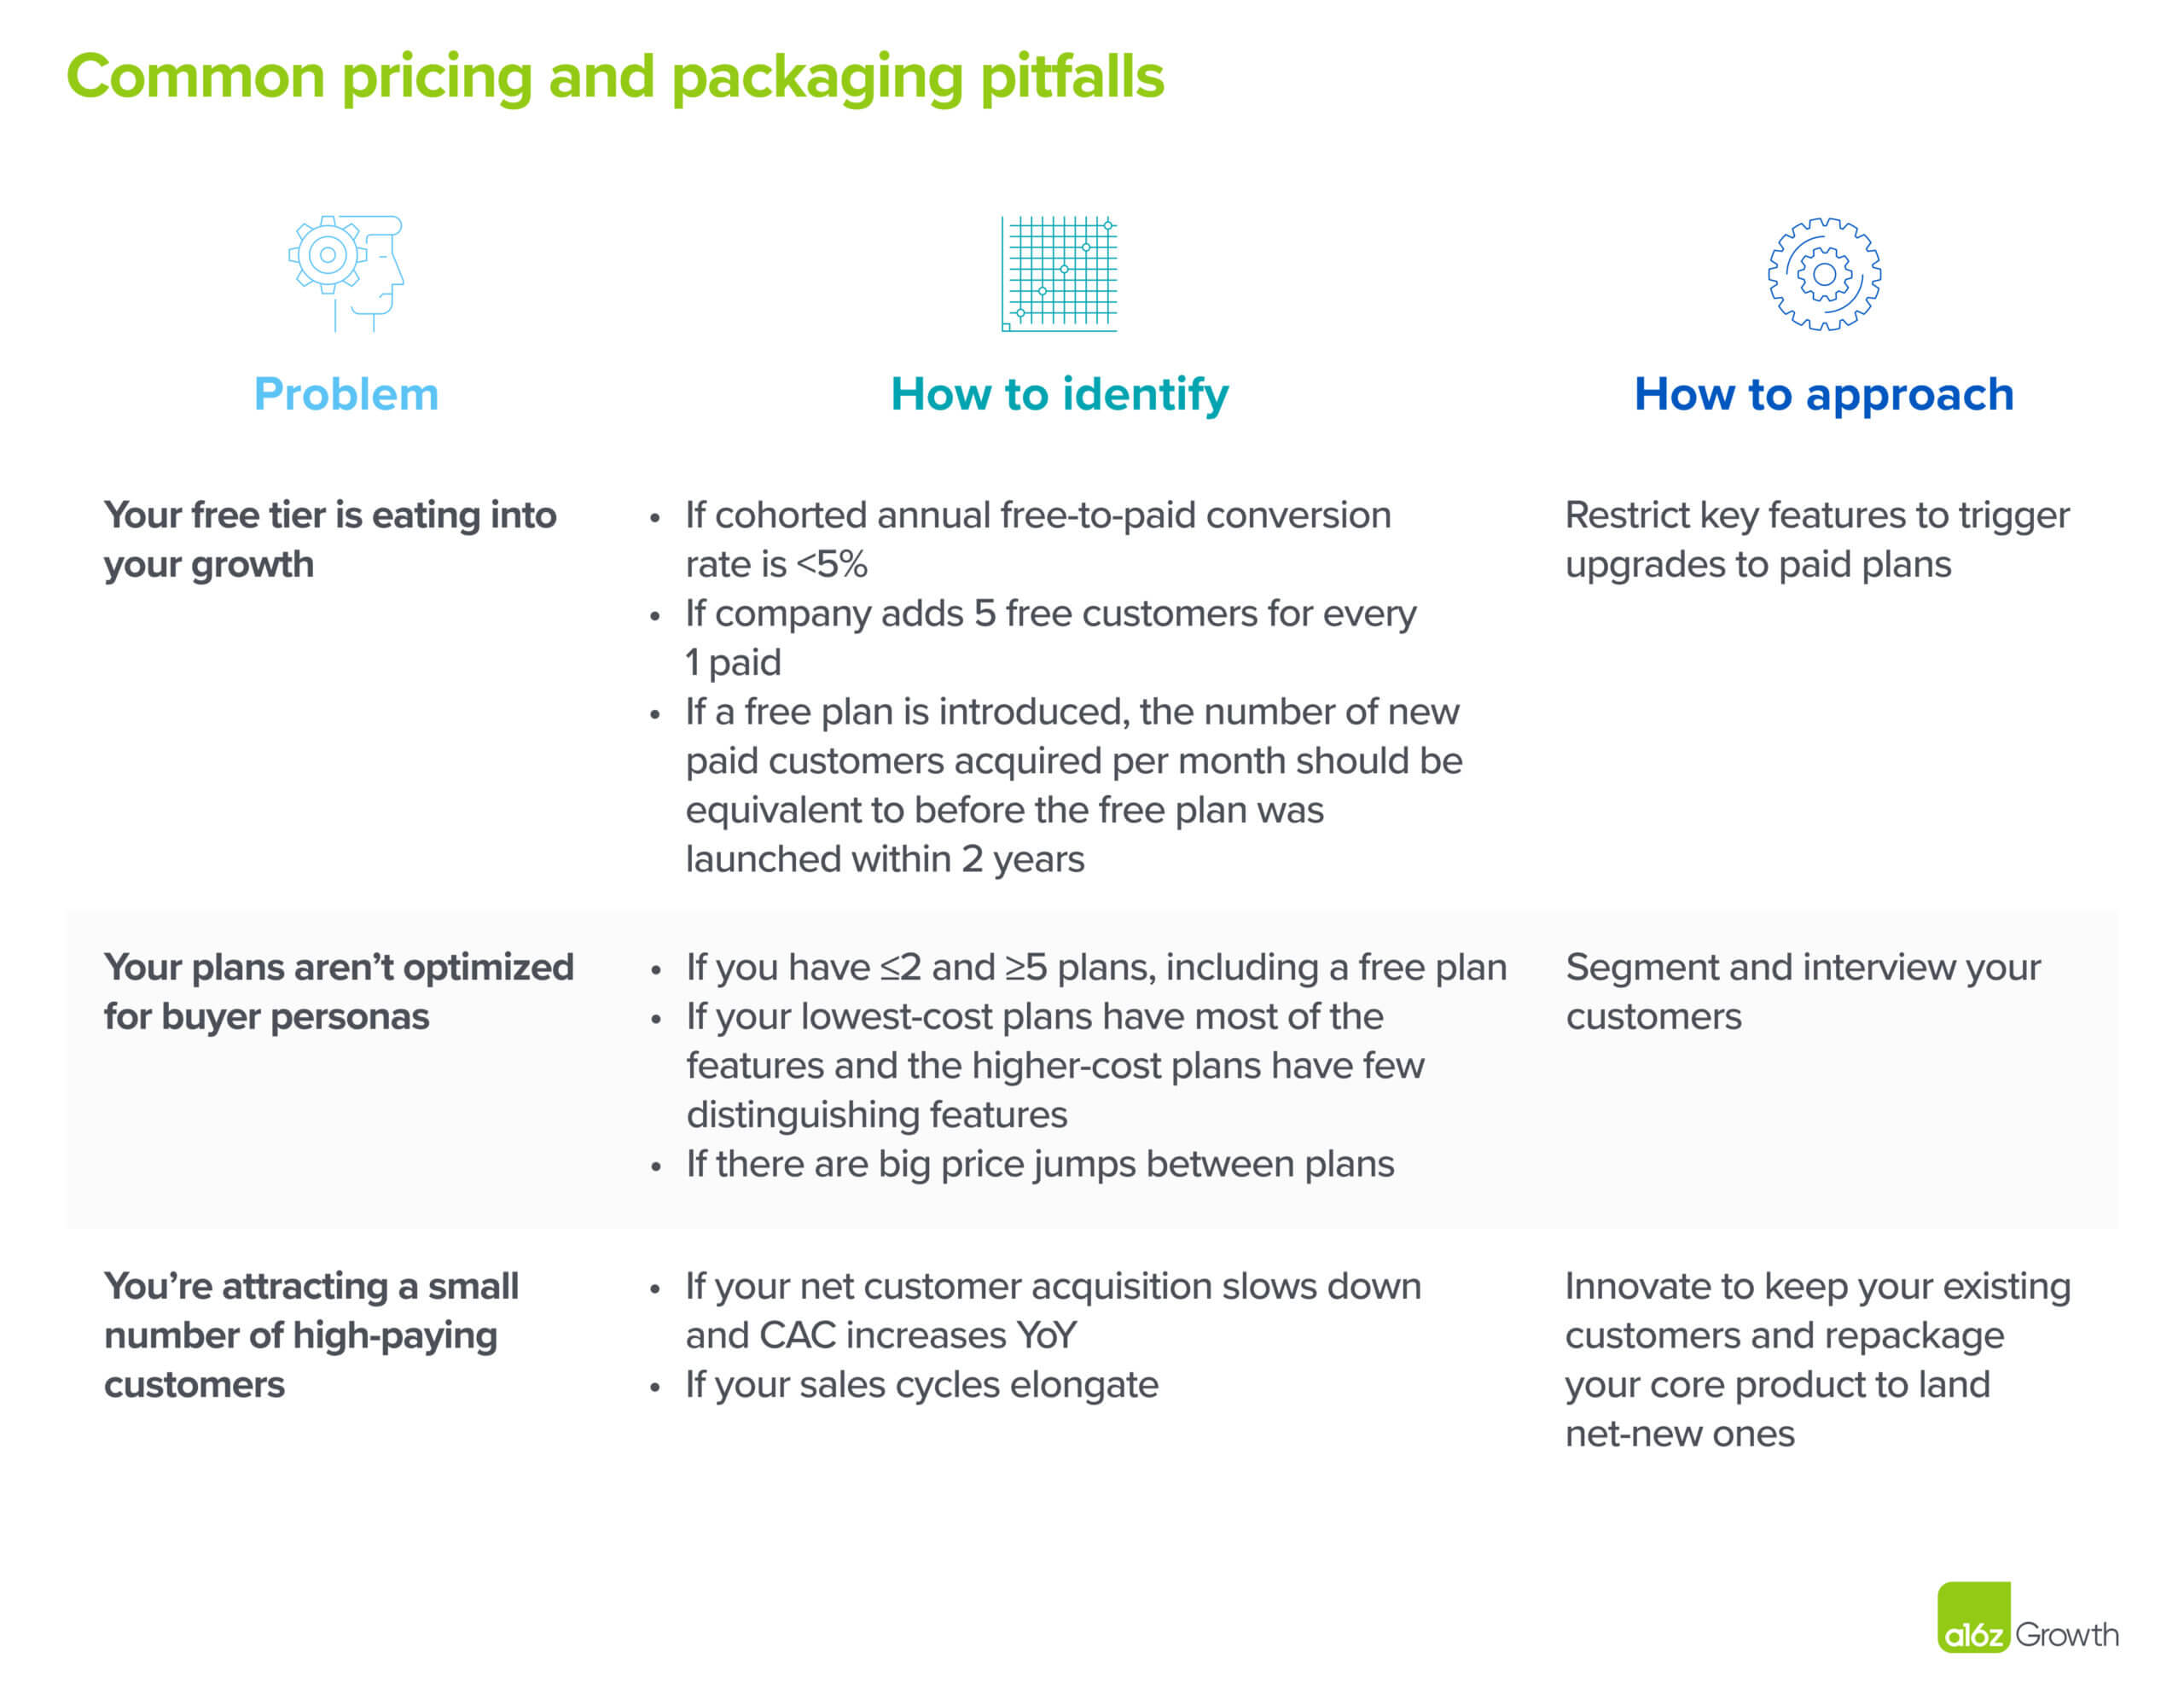 Common pricing and packaging pitfalls